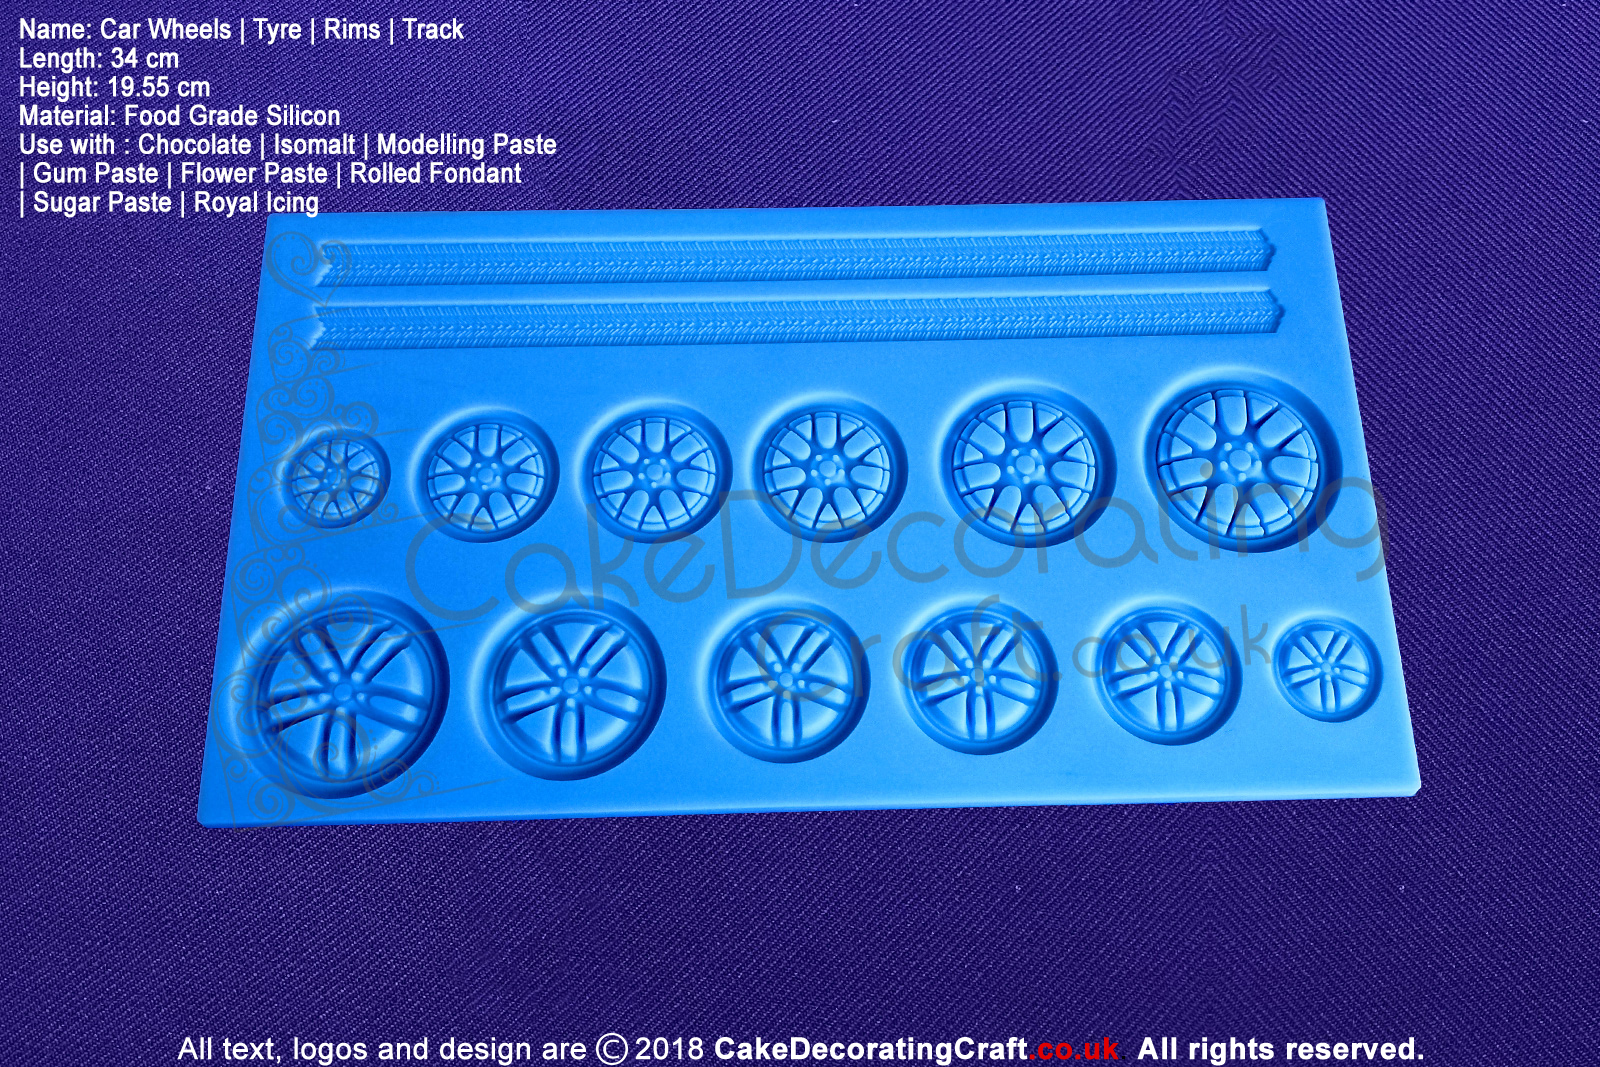 Car Wheels | Tyre | Rims | Track | Silicone Molds | Silicone Moulds | For Gumpaste Sugarpaste Fondant Modelling Paste | Cake and Cupcake Decorating Craft Tool